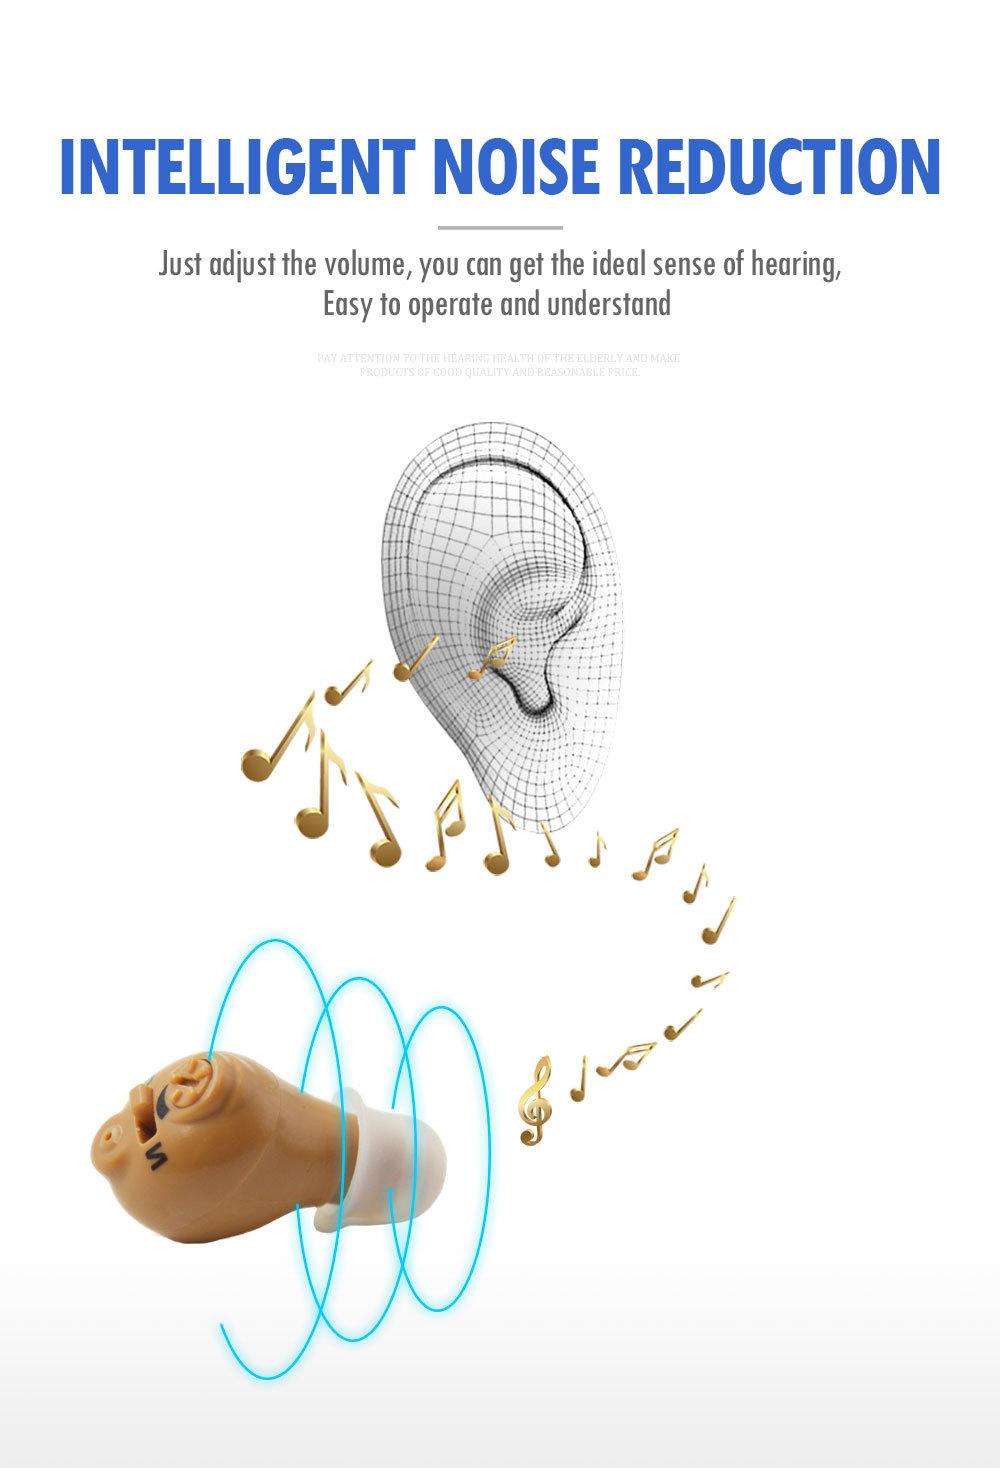 Ear Sound Emplifie Aids Hearing Aid Audiphones with CE